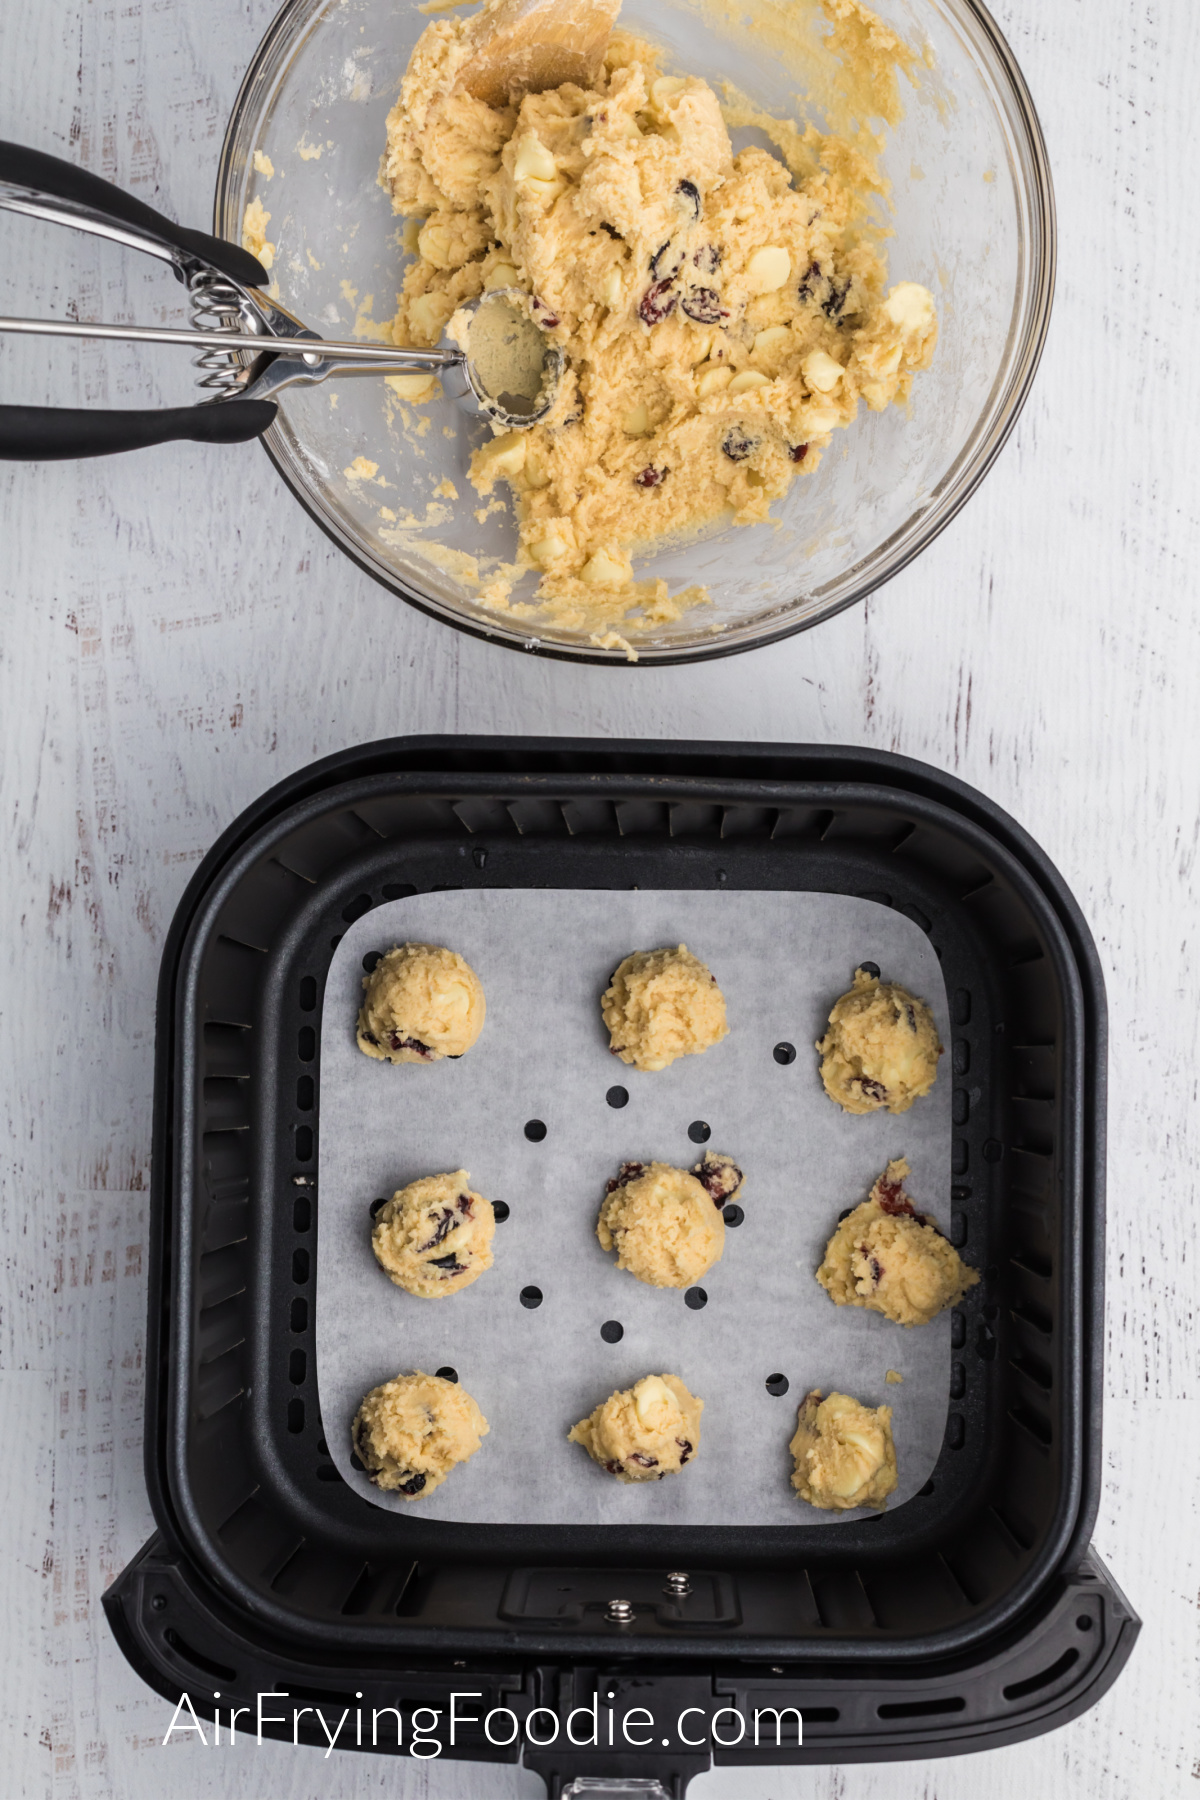 Cookie dough scooped onto parchment paper in the air fryer basket.